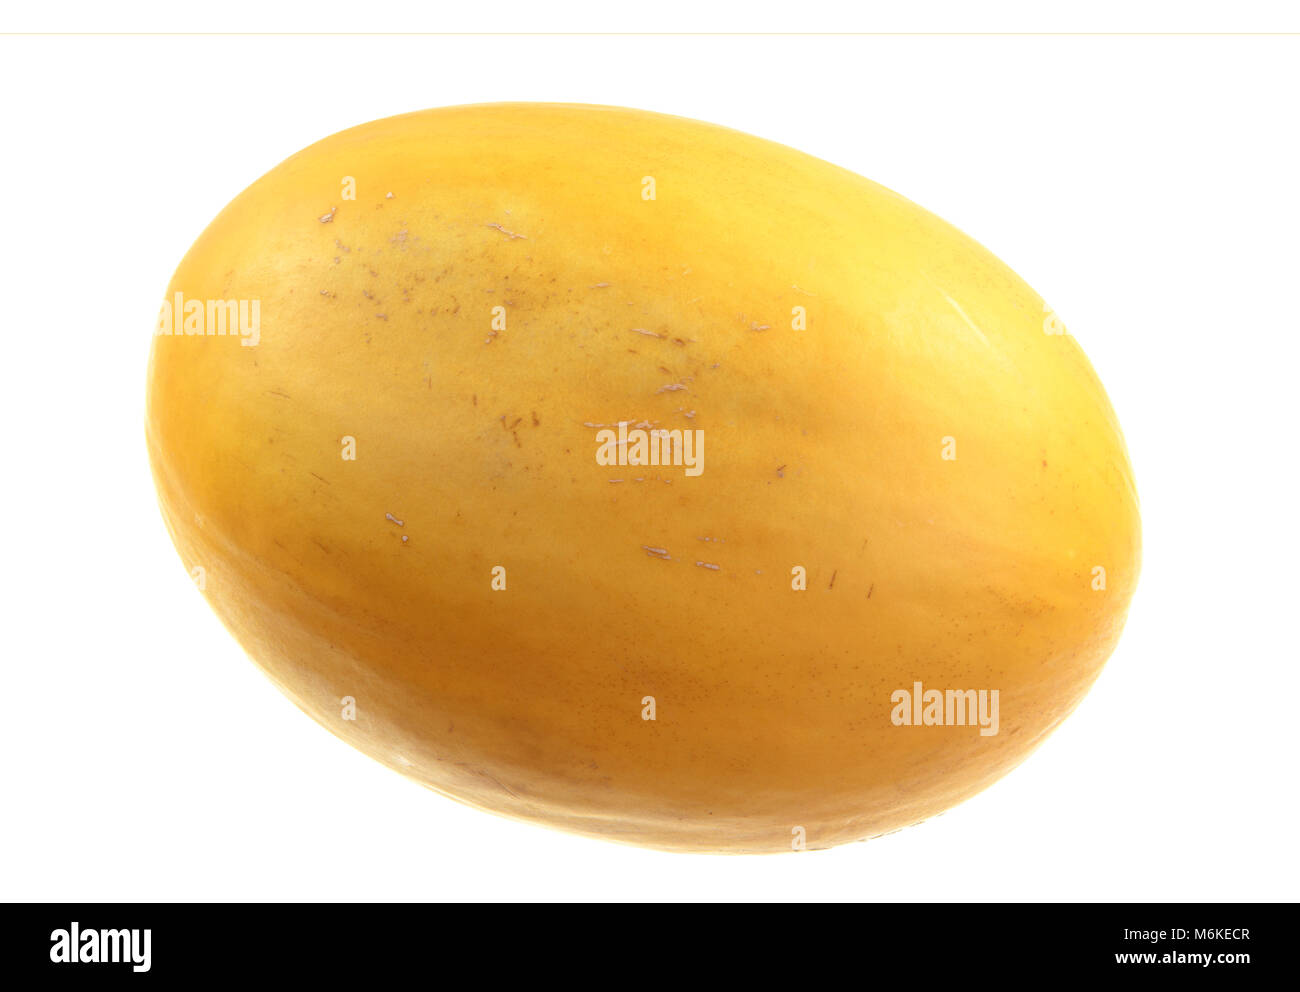 The Golden melon, also called Hello Melon, is a refreshing, crispy and crunchy fruit, with an elliptical shape, high in sugar and rich in water. Stock Photo